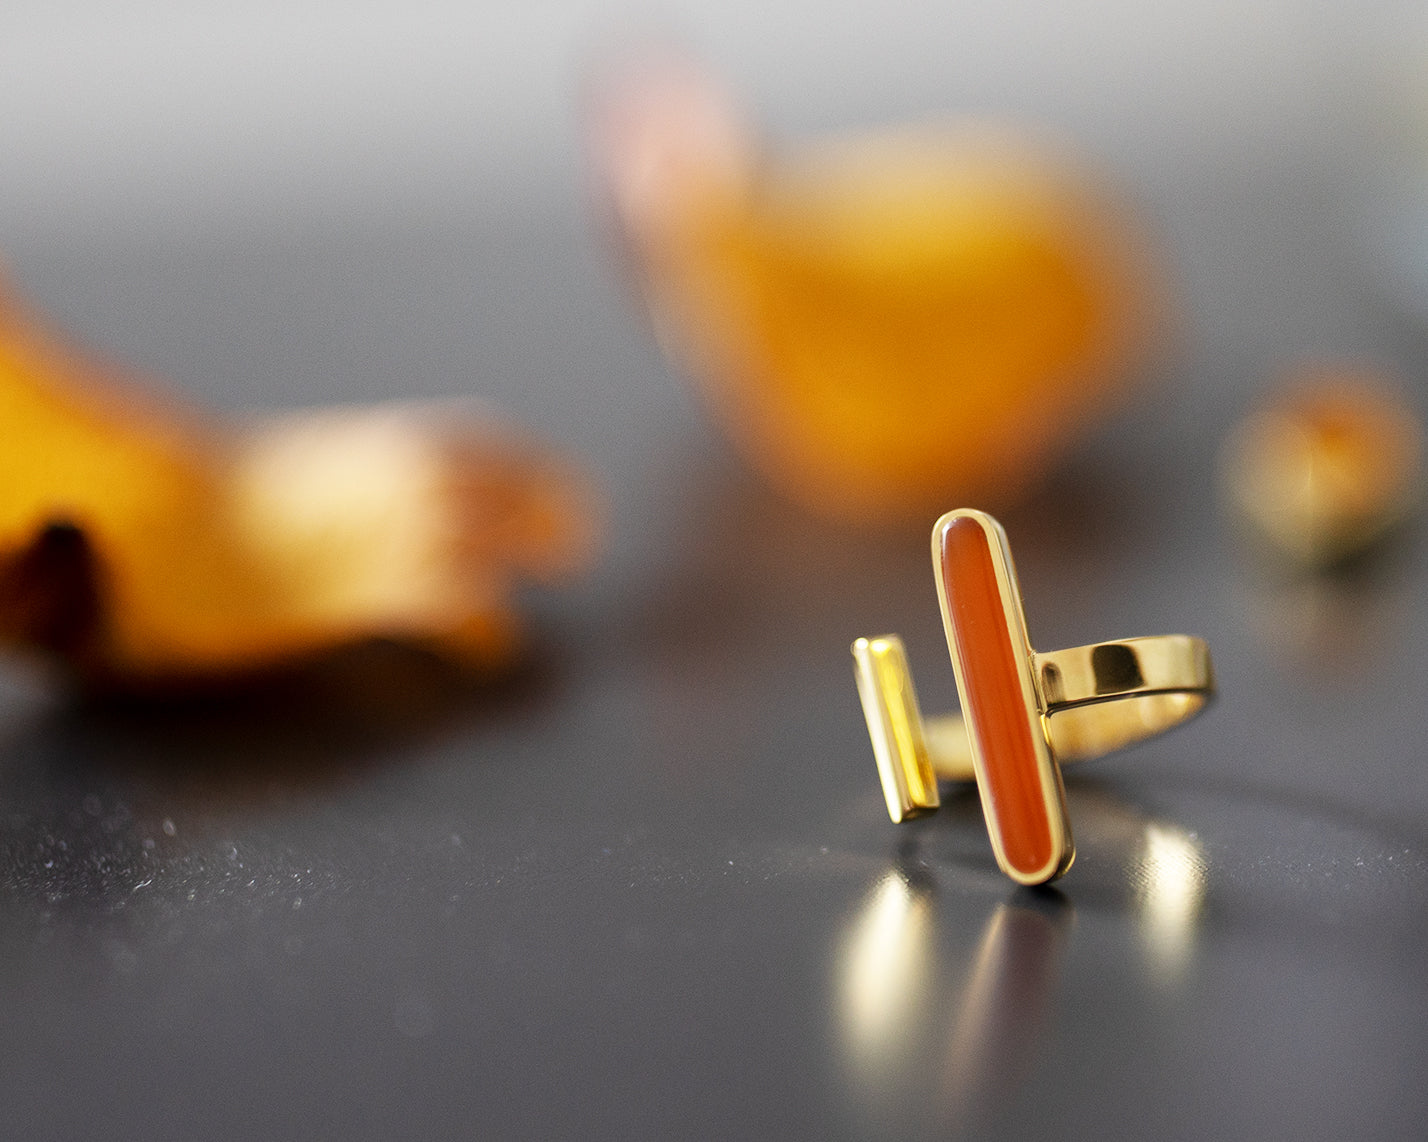 Open Ring Gold with Orange Agate